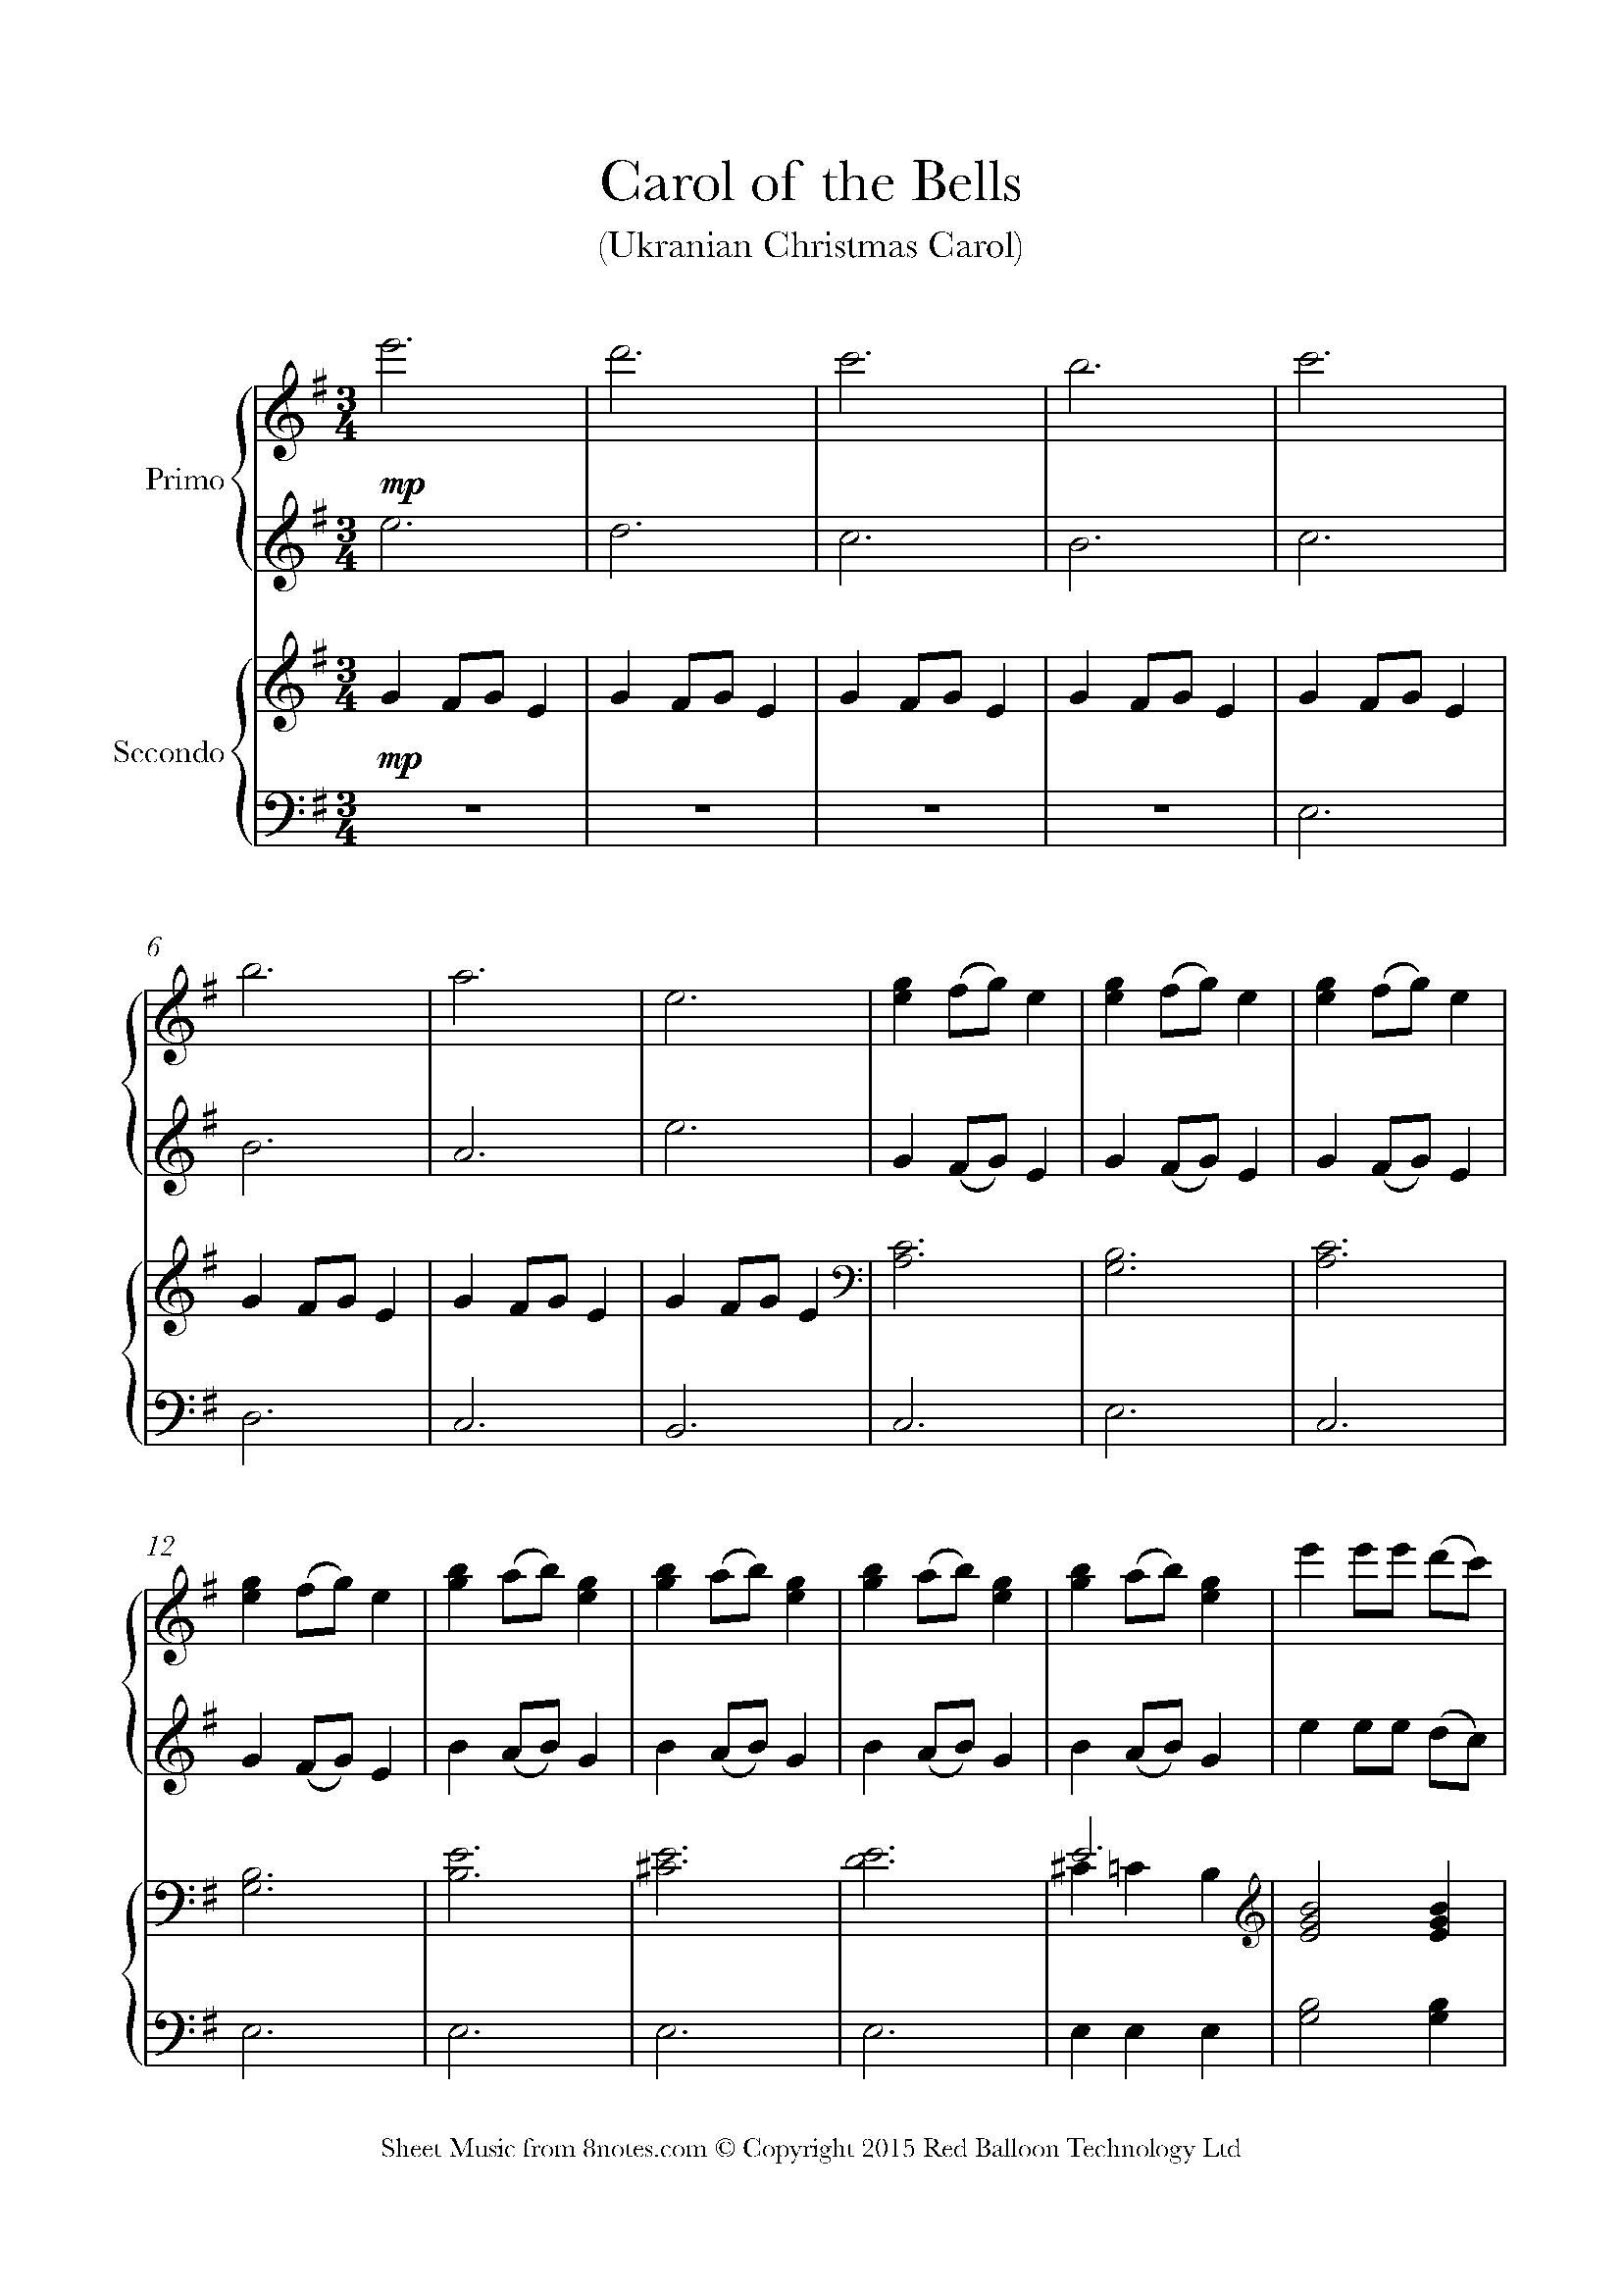 Carol of the Bells Sheet music for Piano Duet - 8notes.com